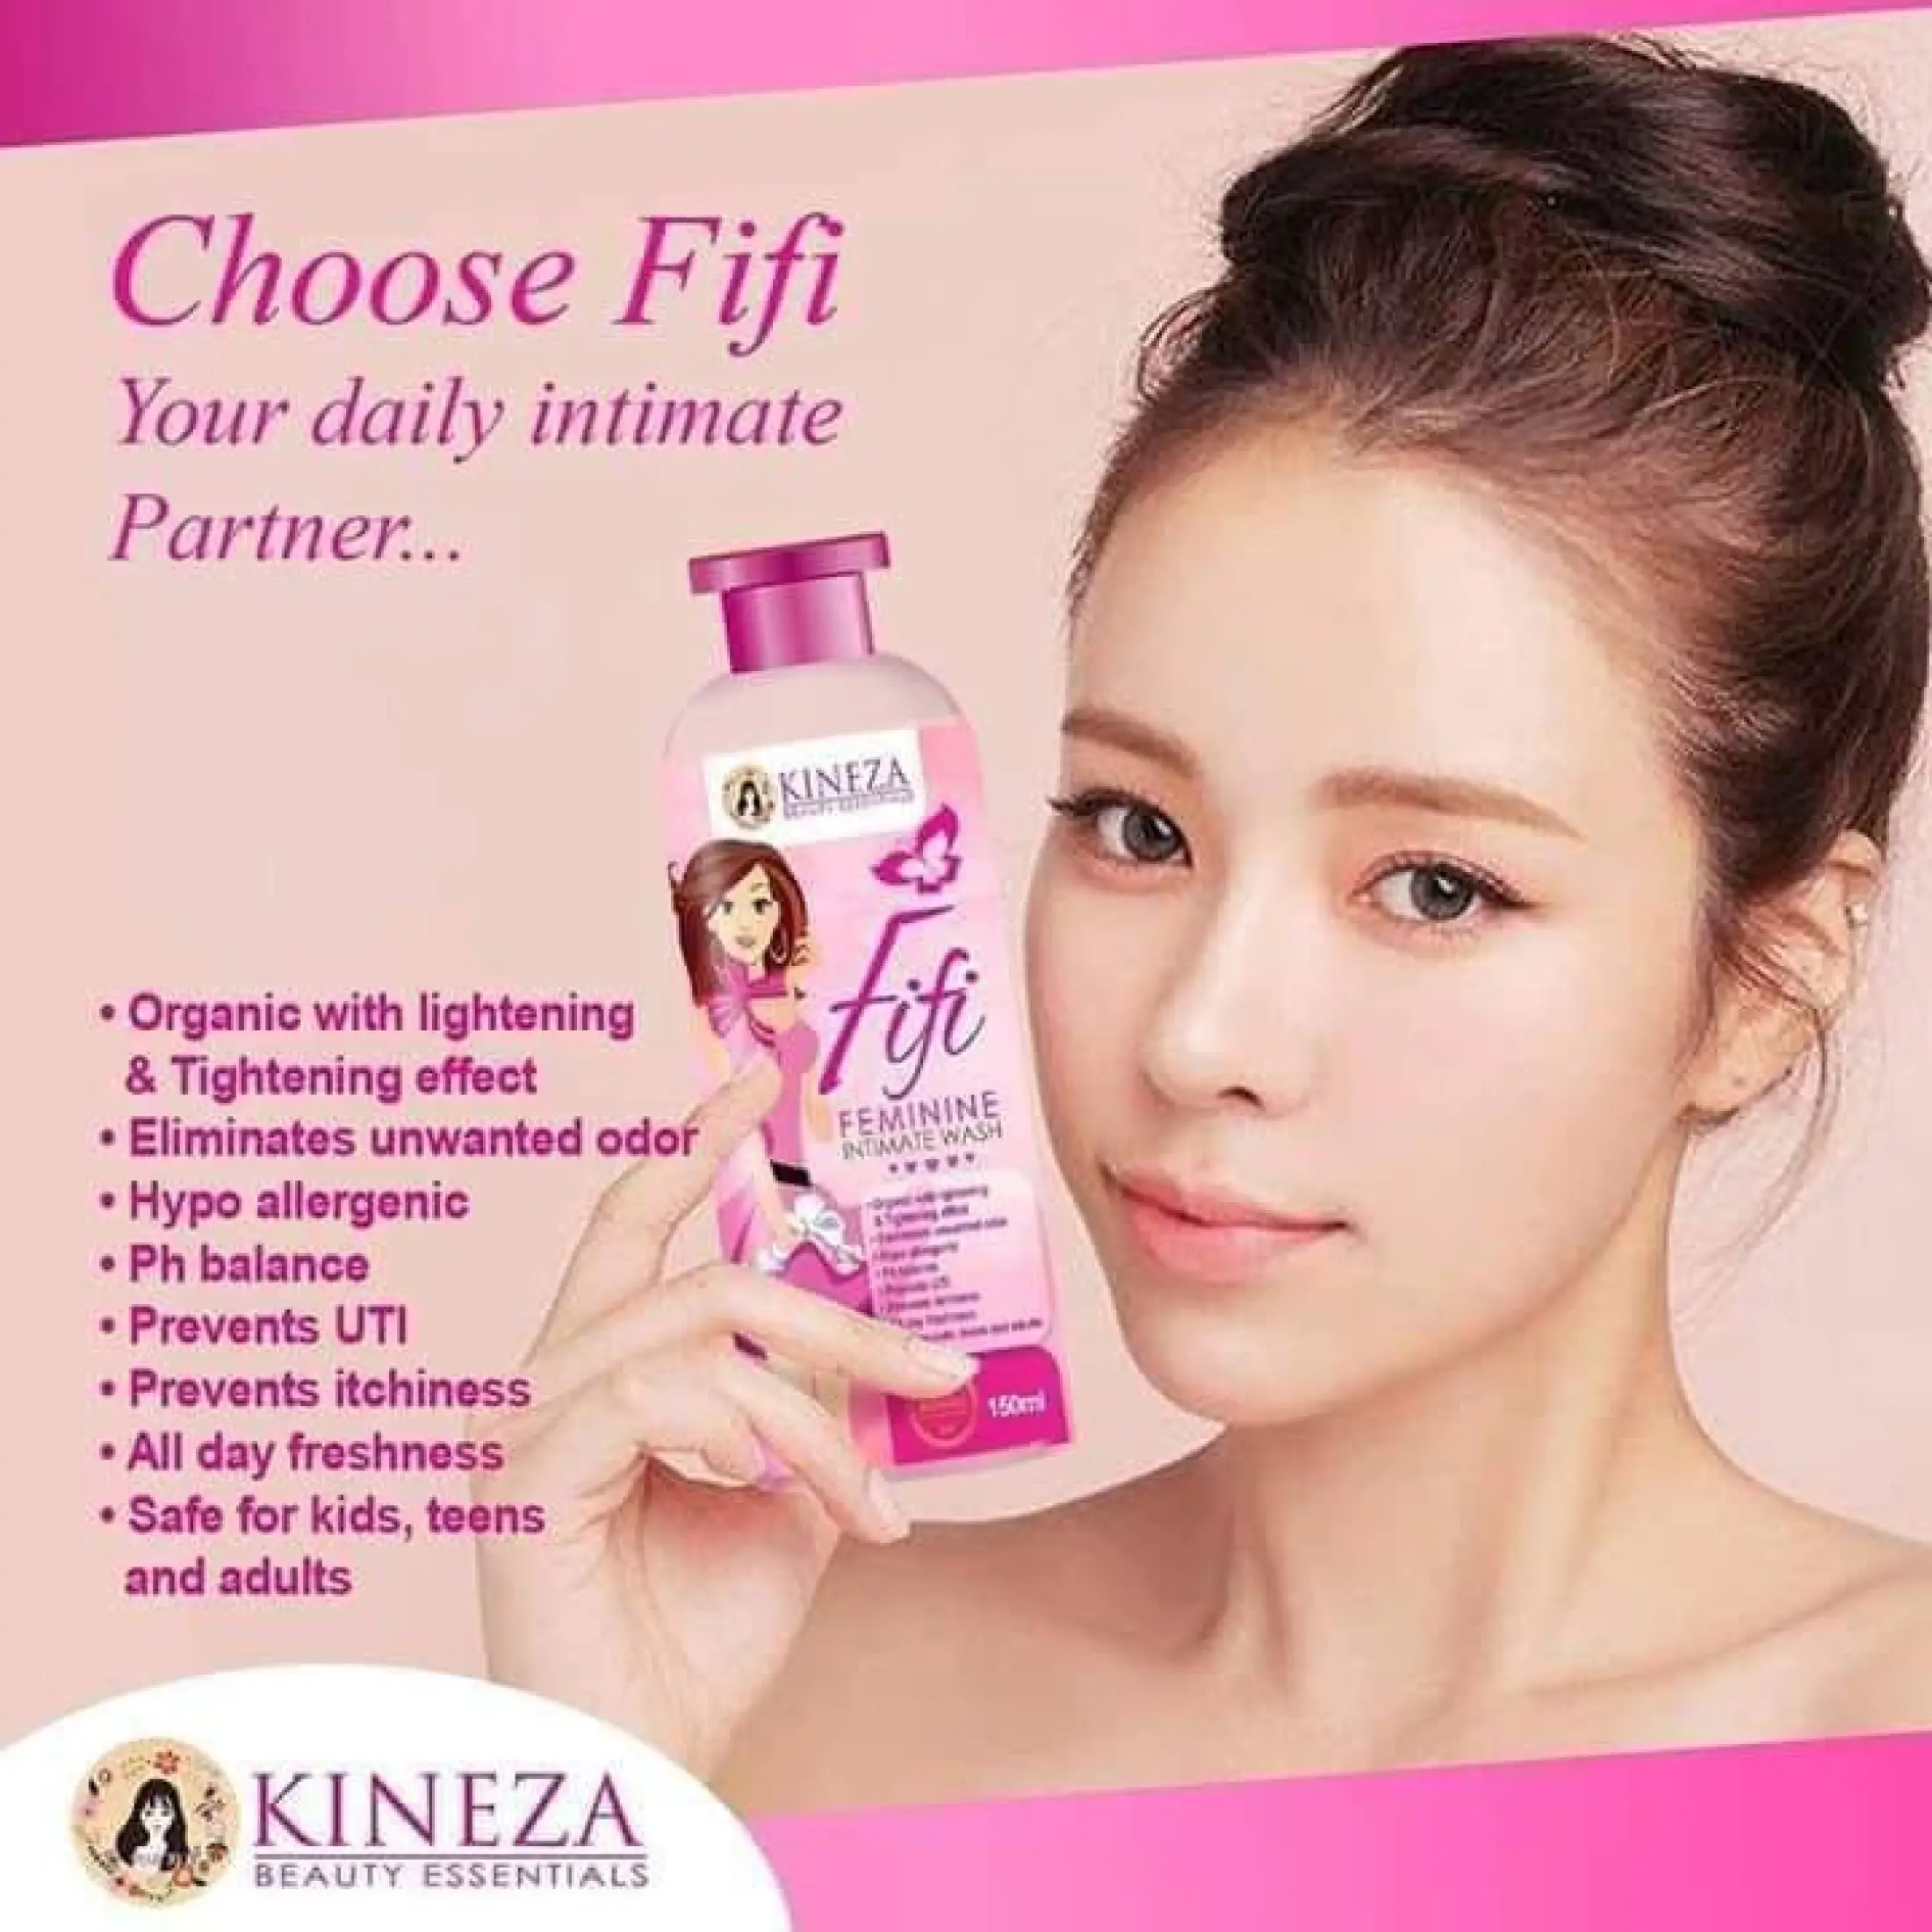 Beauty Essentials For Girls And Women 100 Original Kineza Fifi Feminine Intimate Wash Tightening Antibacterial Wash Cures Vaginal Problems Intimate Care All Day Freshness Hygiene Essentials Flash Today 79 For Intimate Part Buy 1 Take 1